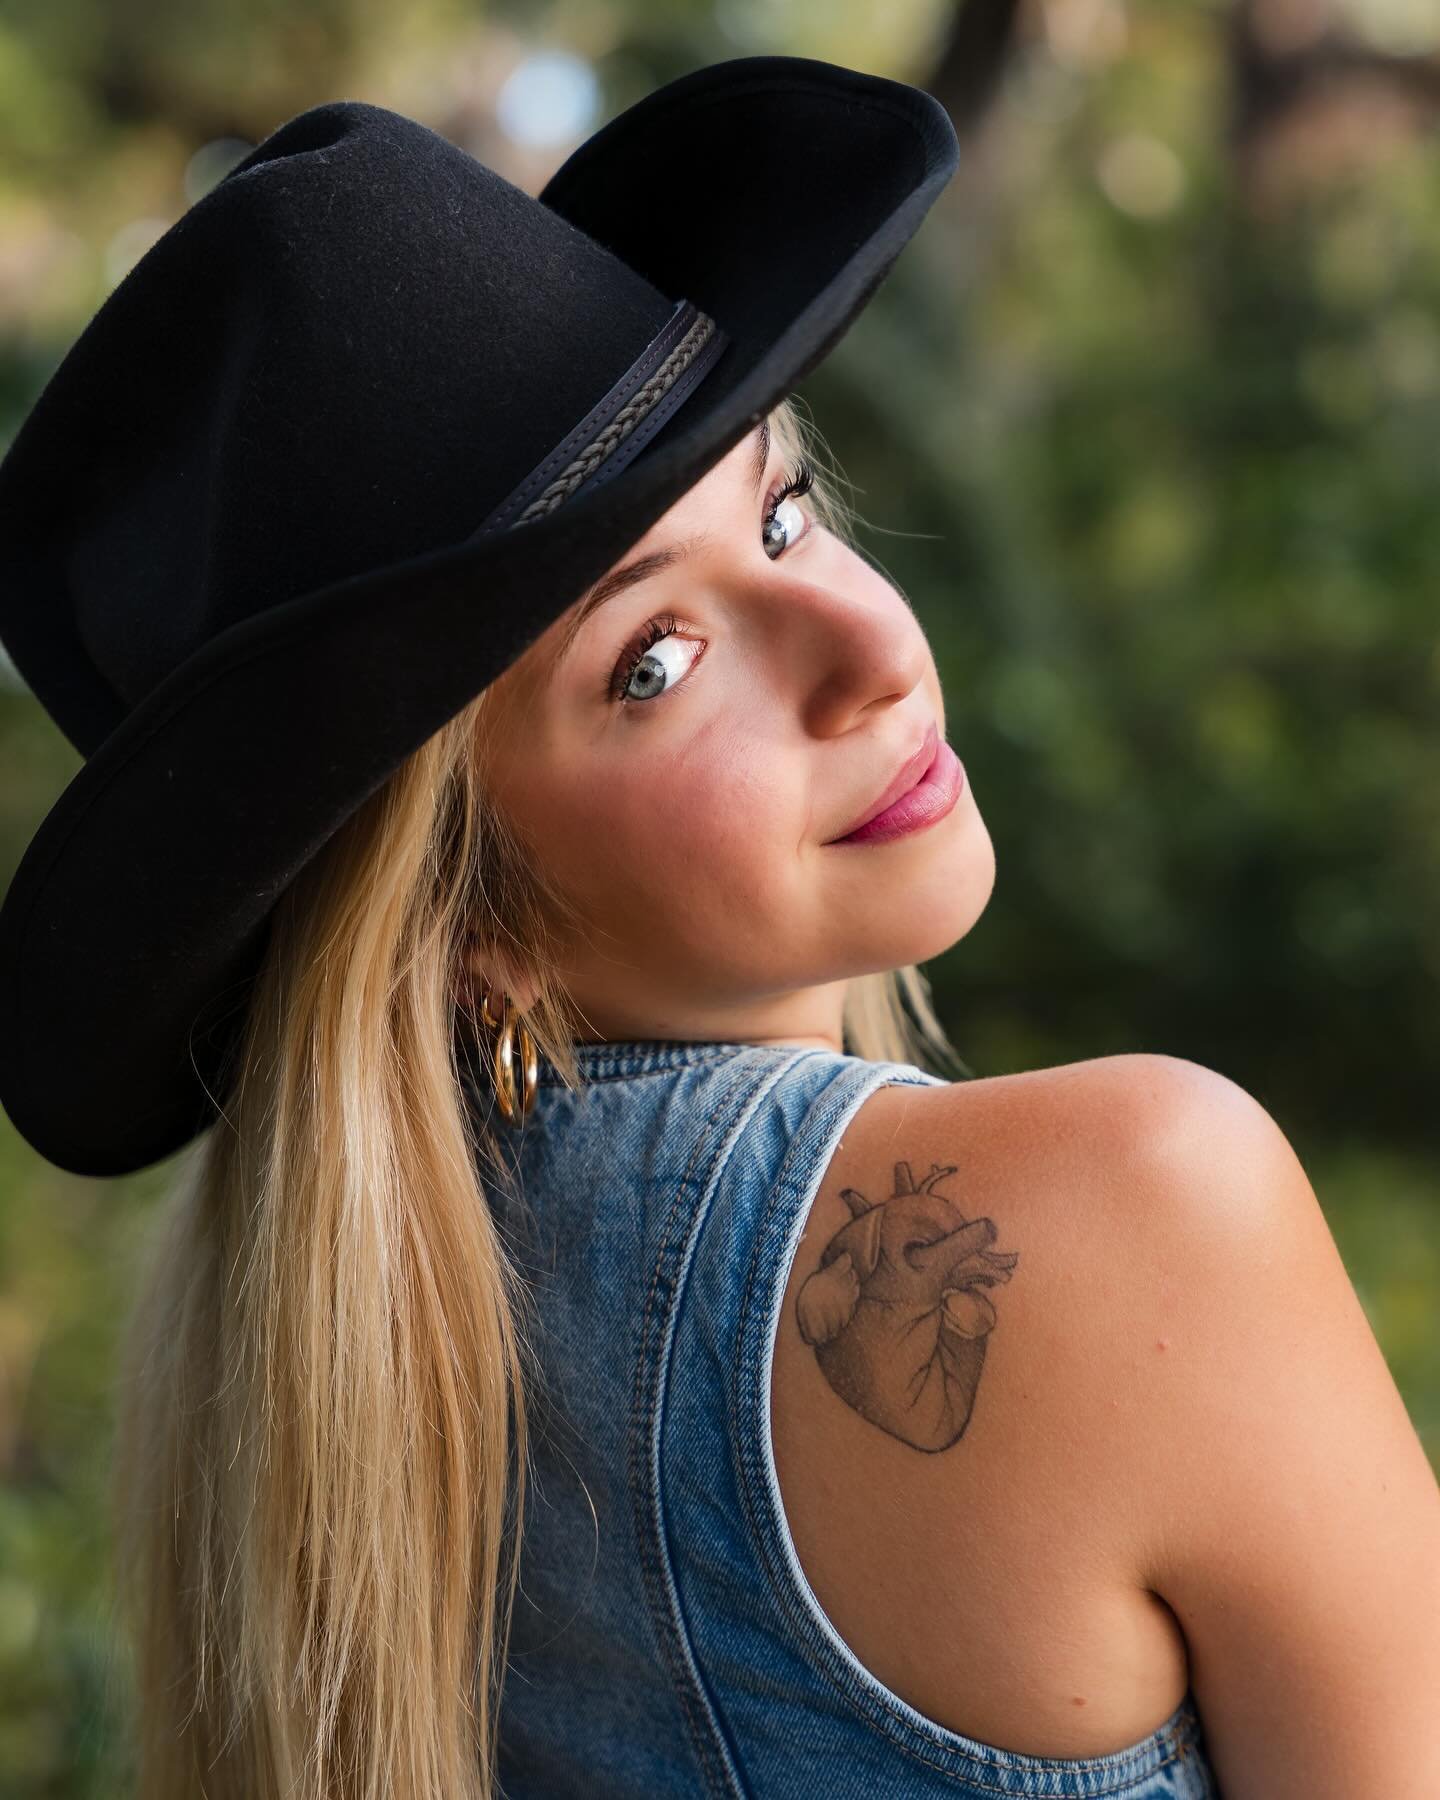 Get you a blonde cowgirl, they definitely have more fun&hellip;
.
.
.
#portraitphotography #portraits #portraitmood #cowgirl #letsgogirls #spiceupyourlife #goodgirl #blondehair #hispanic #latino #photooftheday #instadaily #smallbusiness #supportsmall